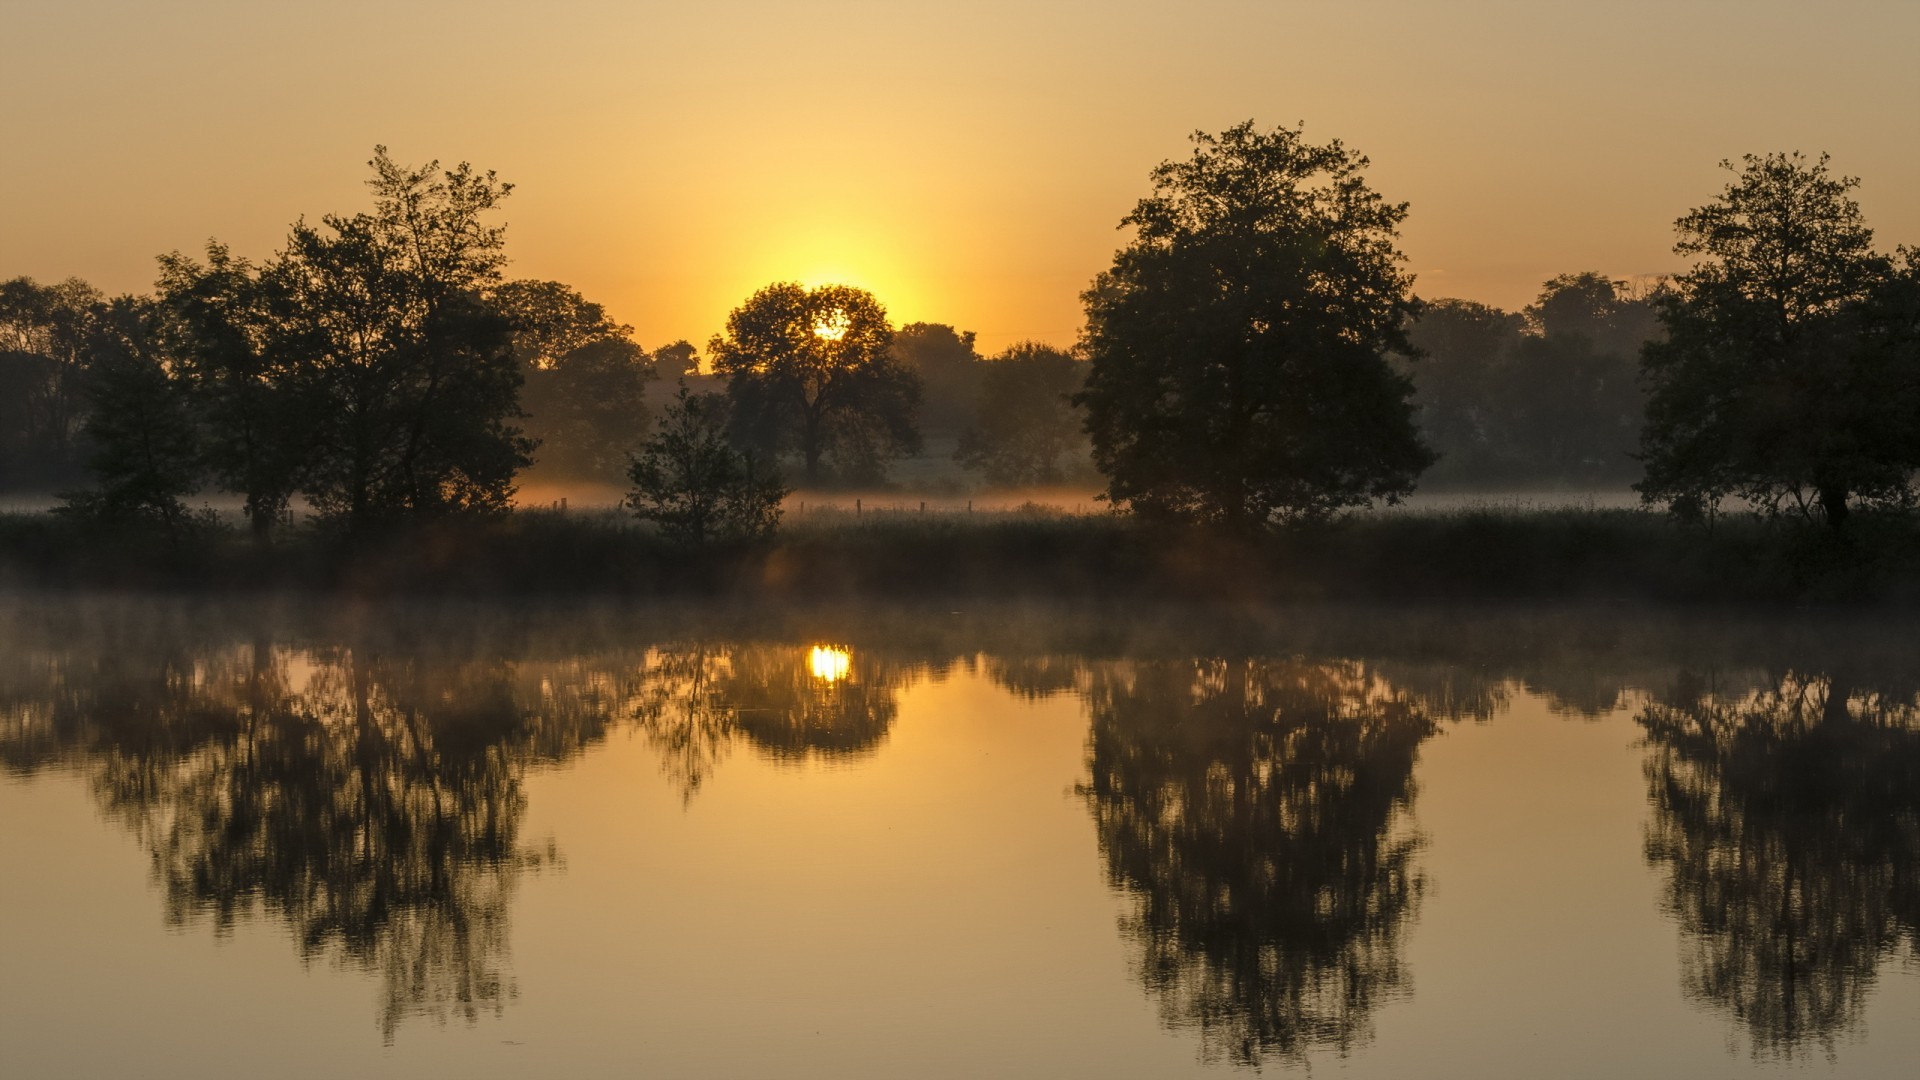 General 1920x1080 landscape mist trees sunrise river nature sunlight water reflection outdoors